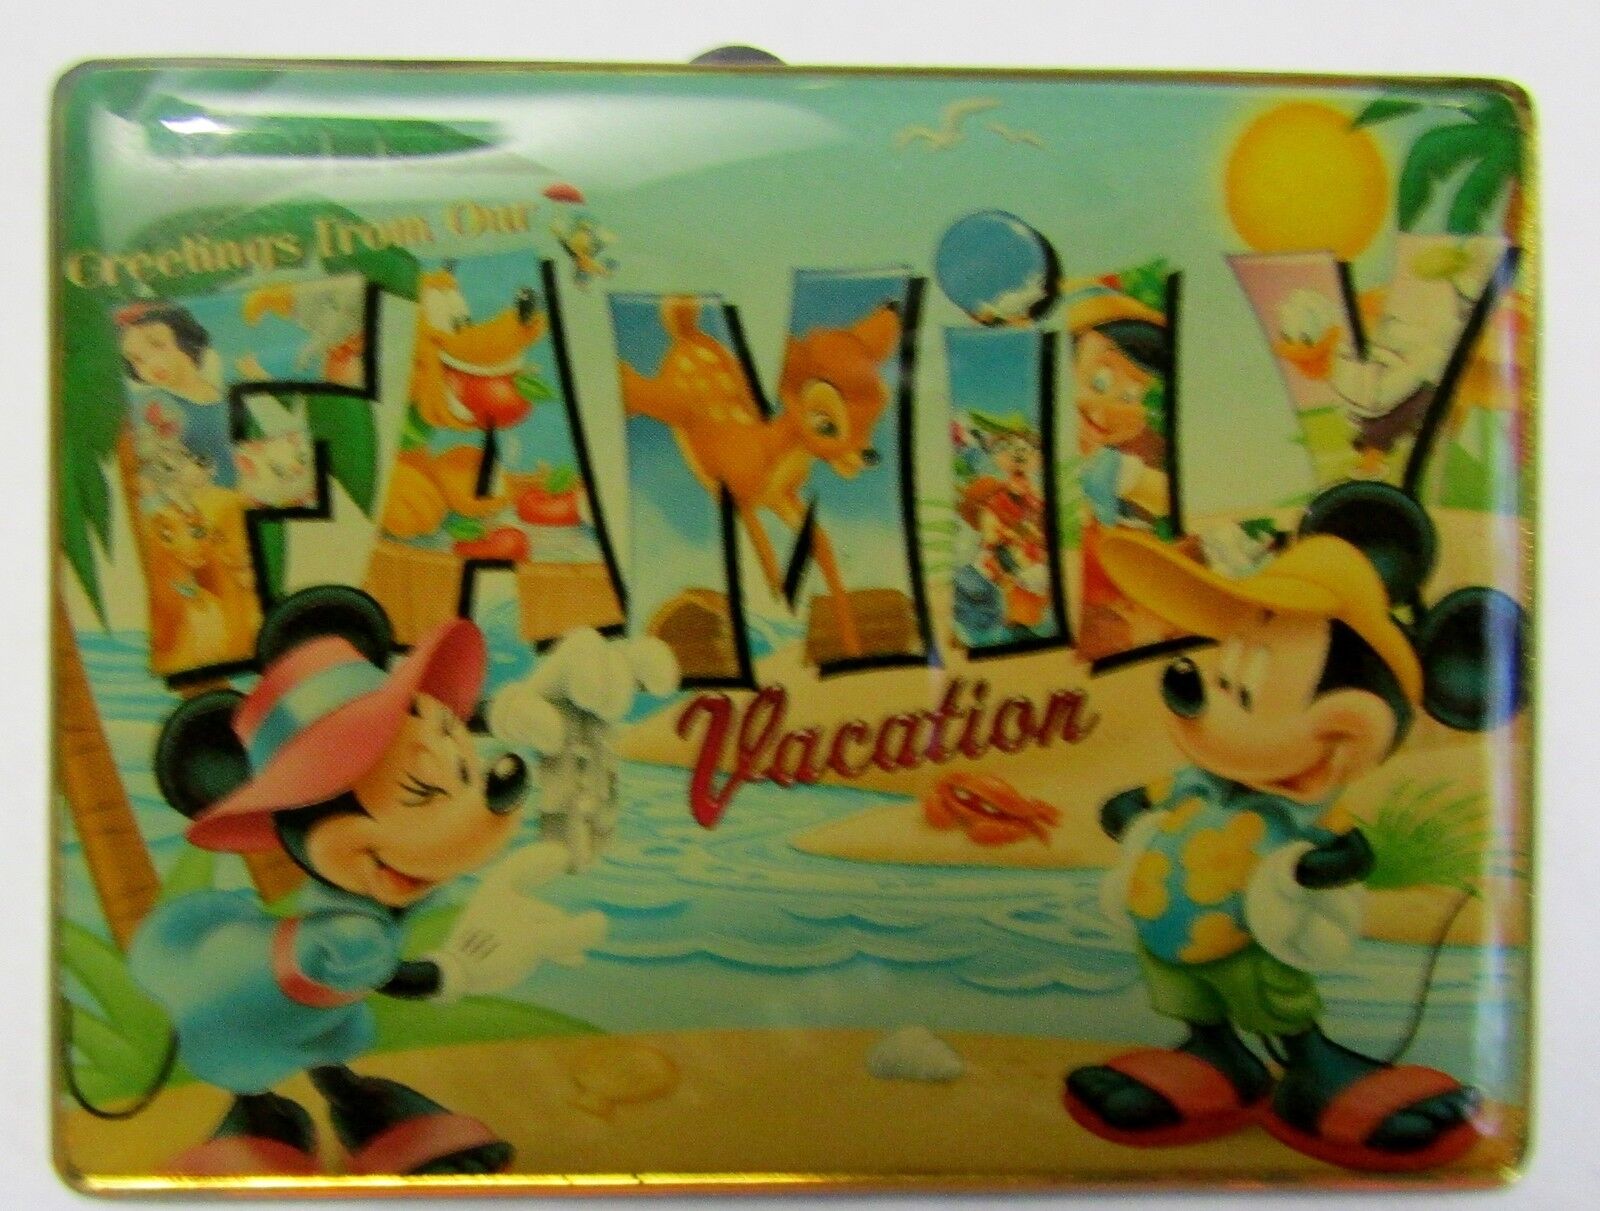 Disney Store Greetings from Our Family Vacation Mickey and Movie Characters  Pin